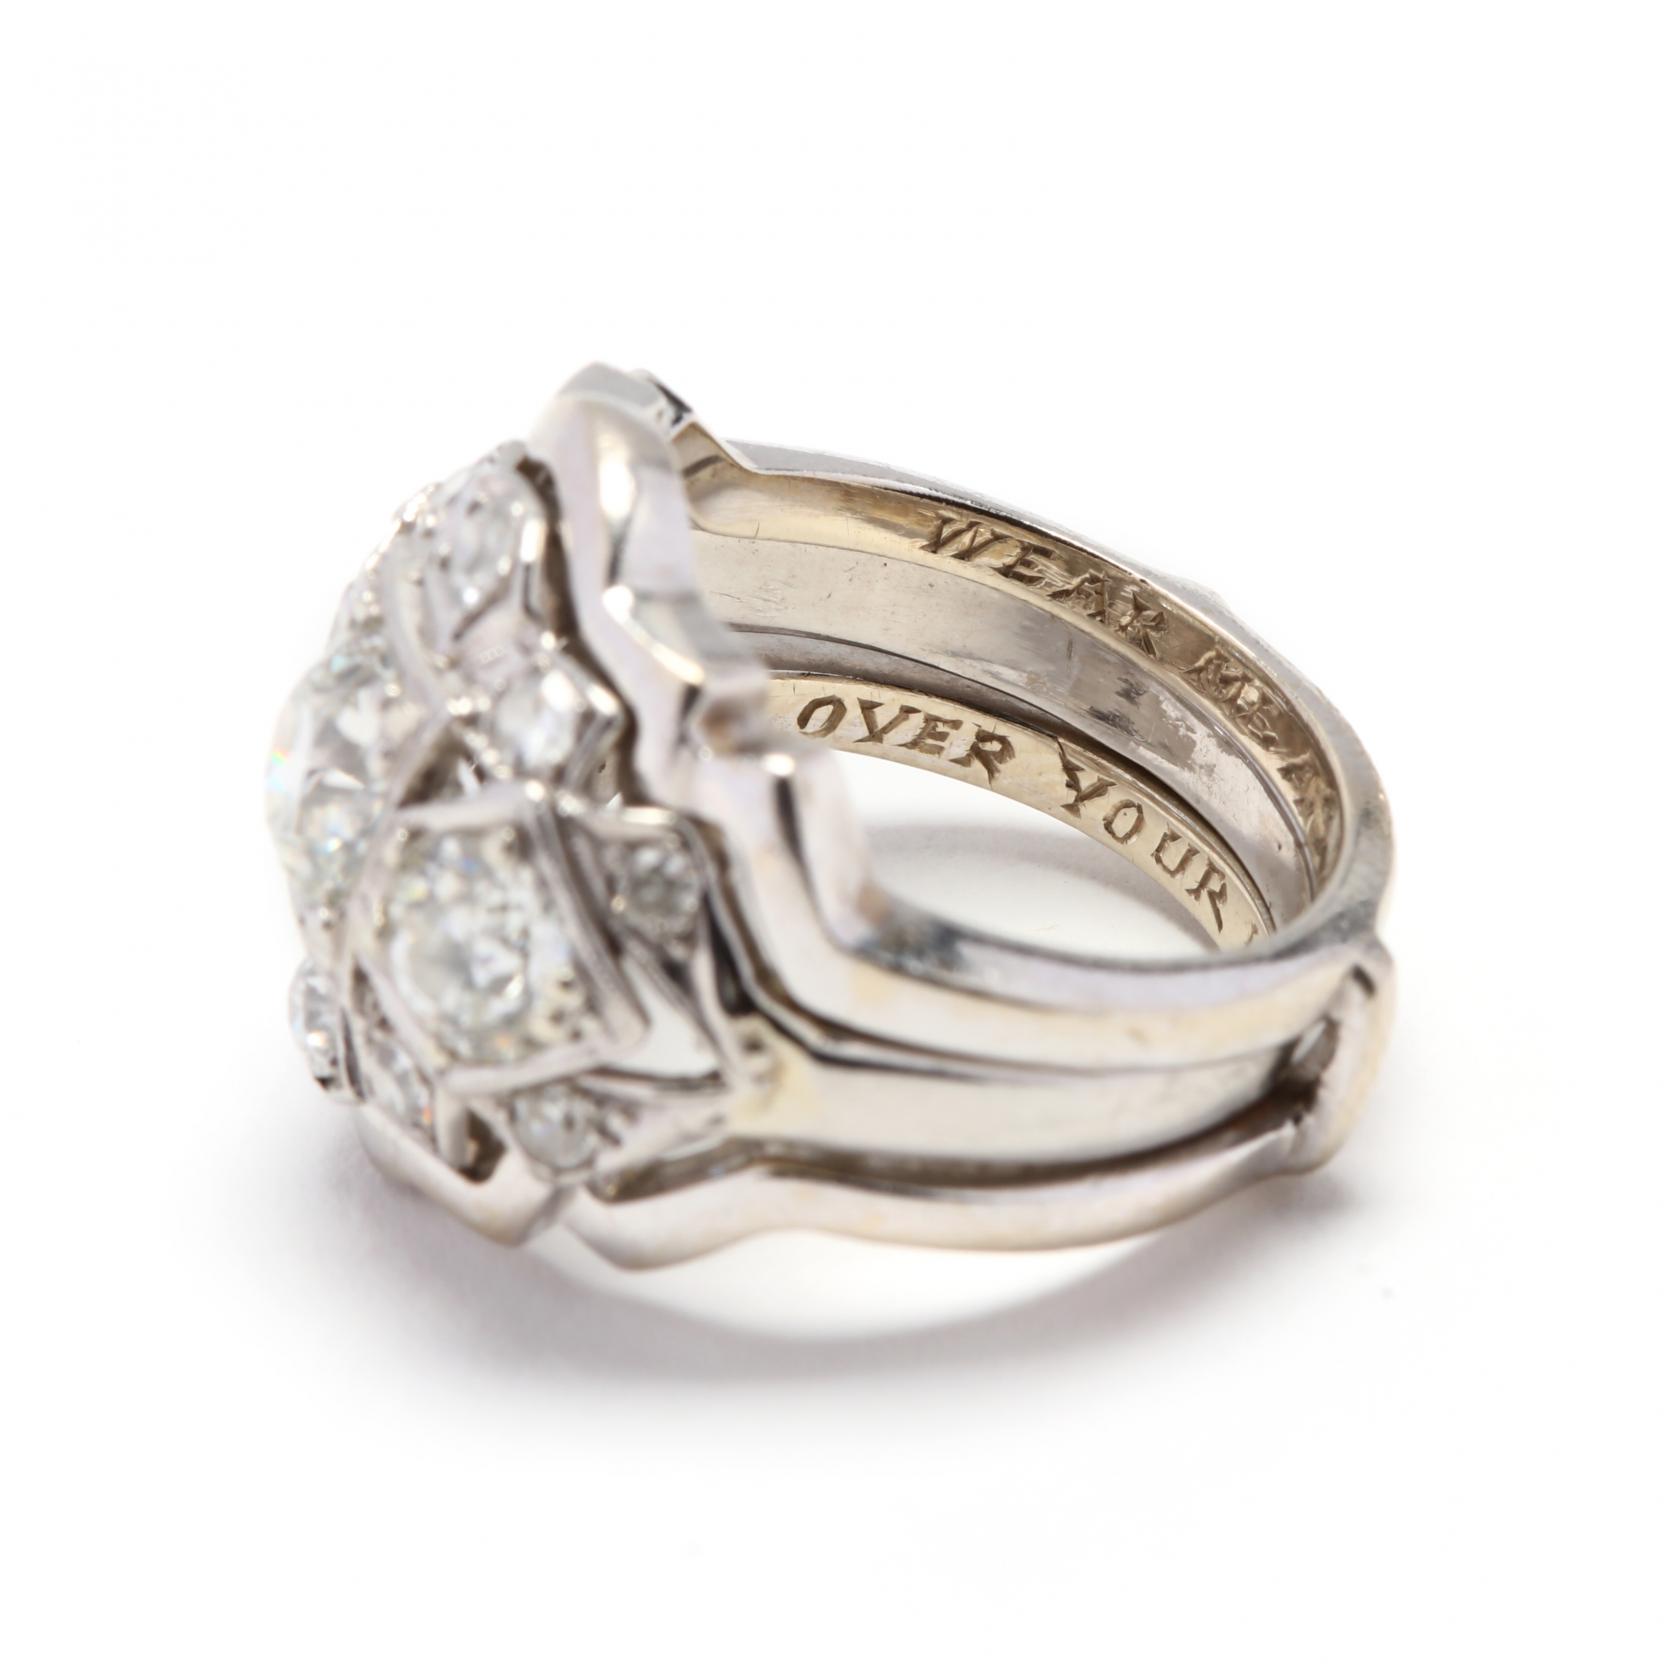 Vintage Platinum and Diamond Ring with 14KT White Gold Jacket - Image 6 of 9